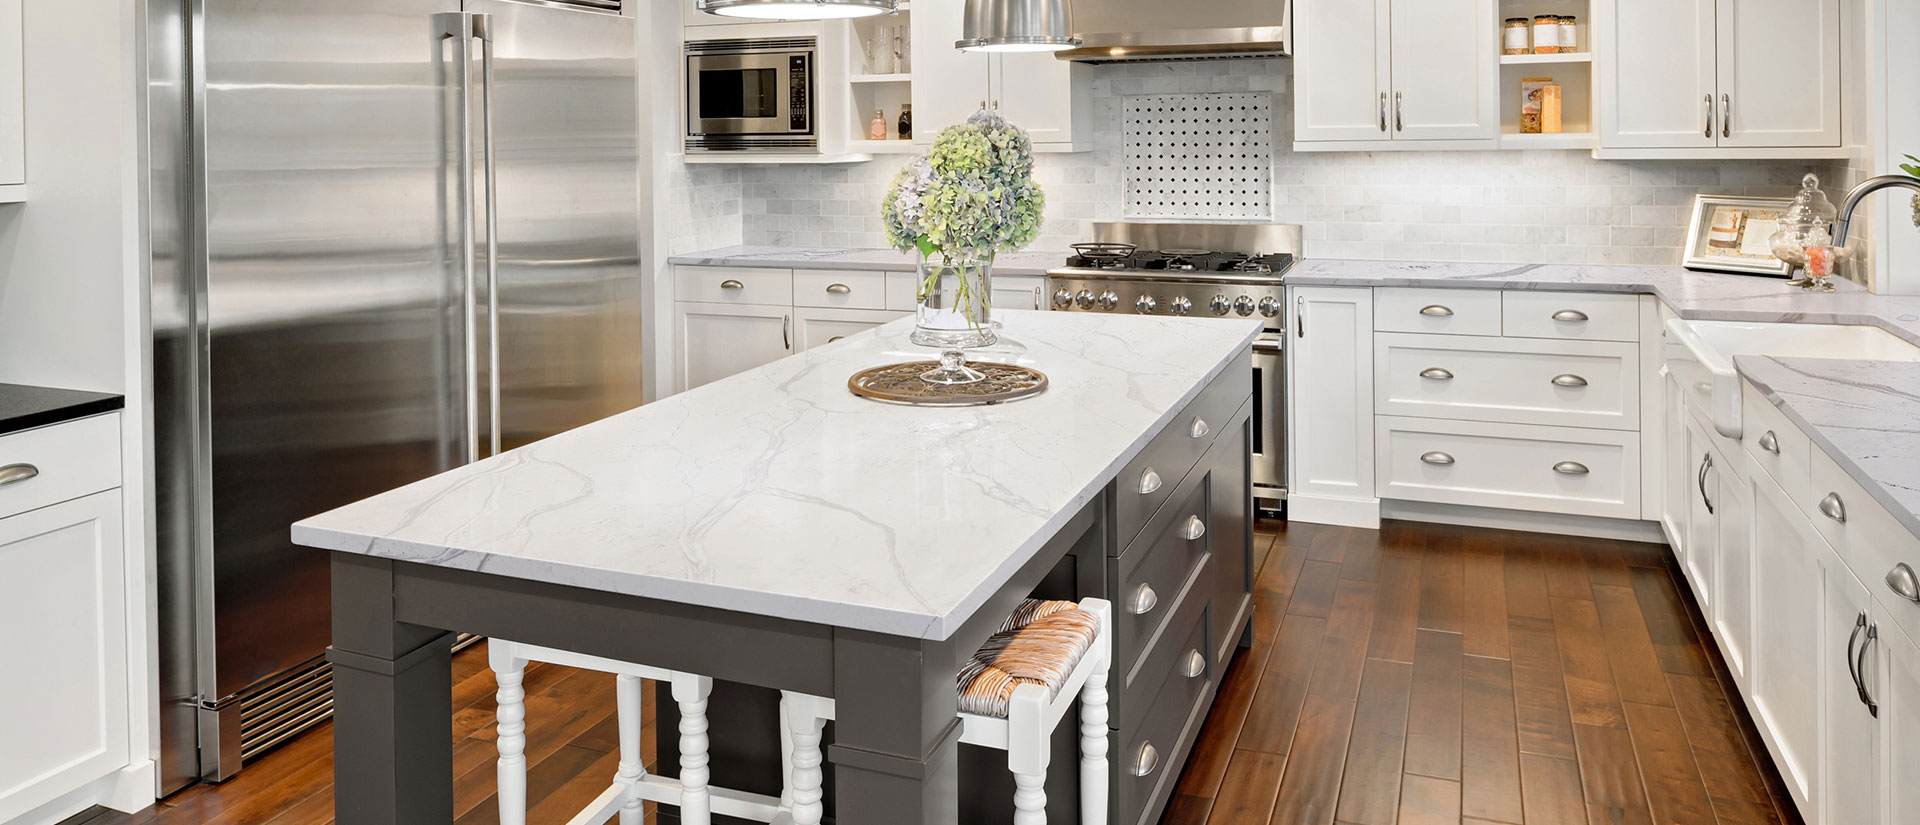 Calacatta Bolina quartz countertop in a spacious kitchen with wooden floors